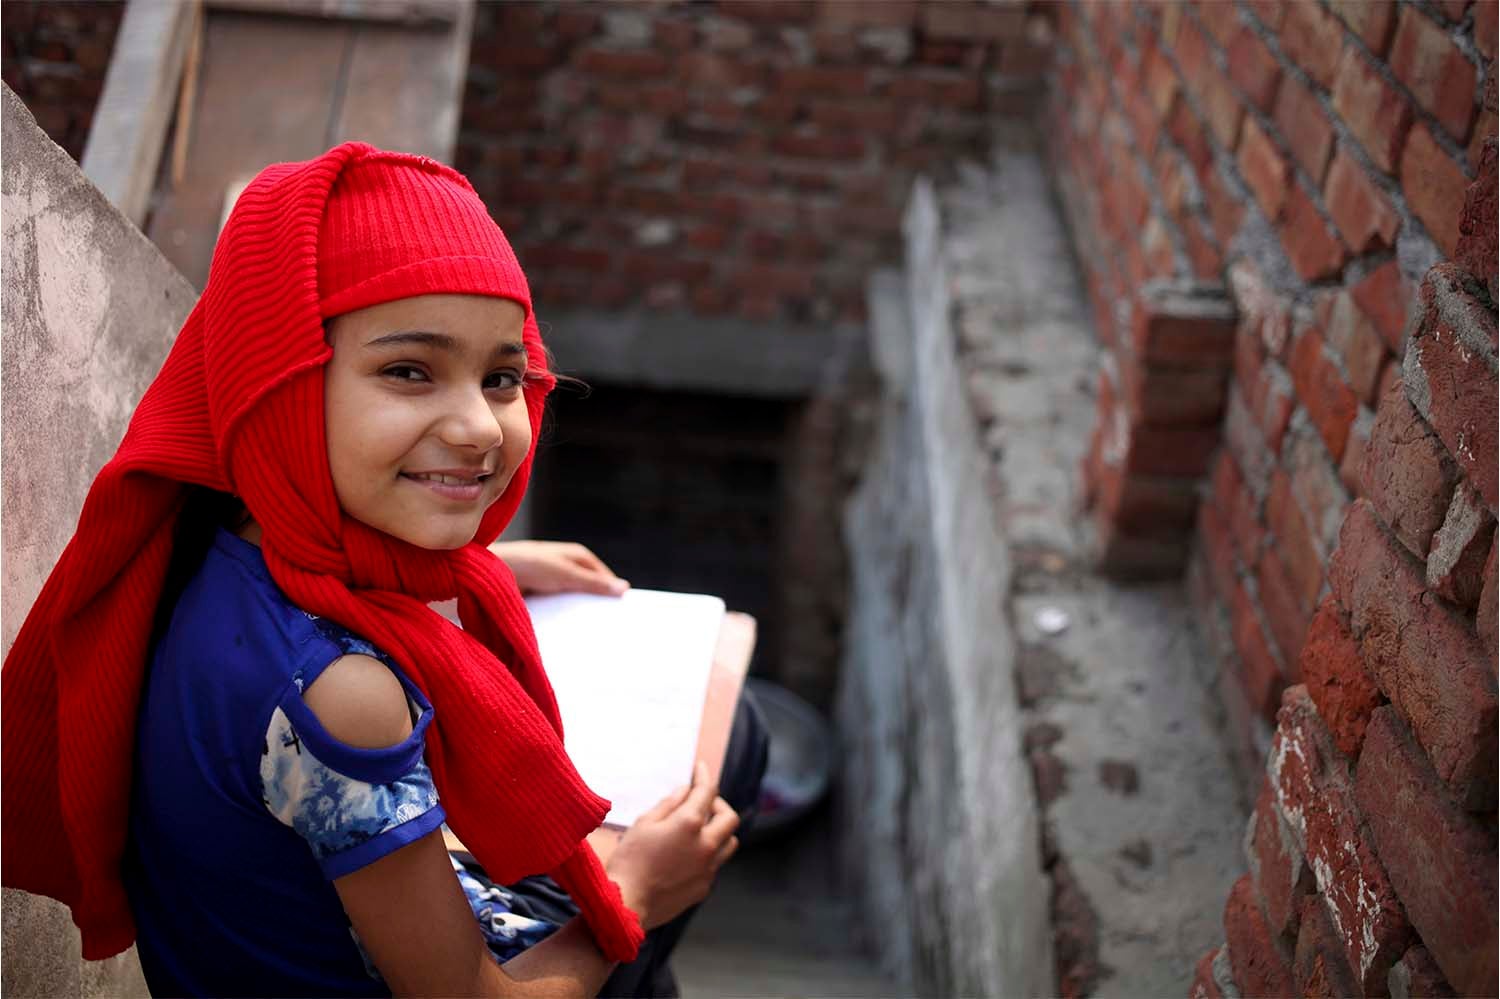 Smiling child working in a stairwell